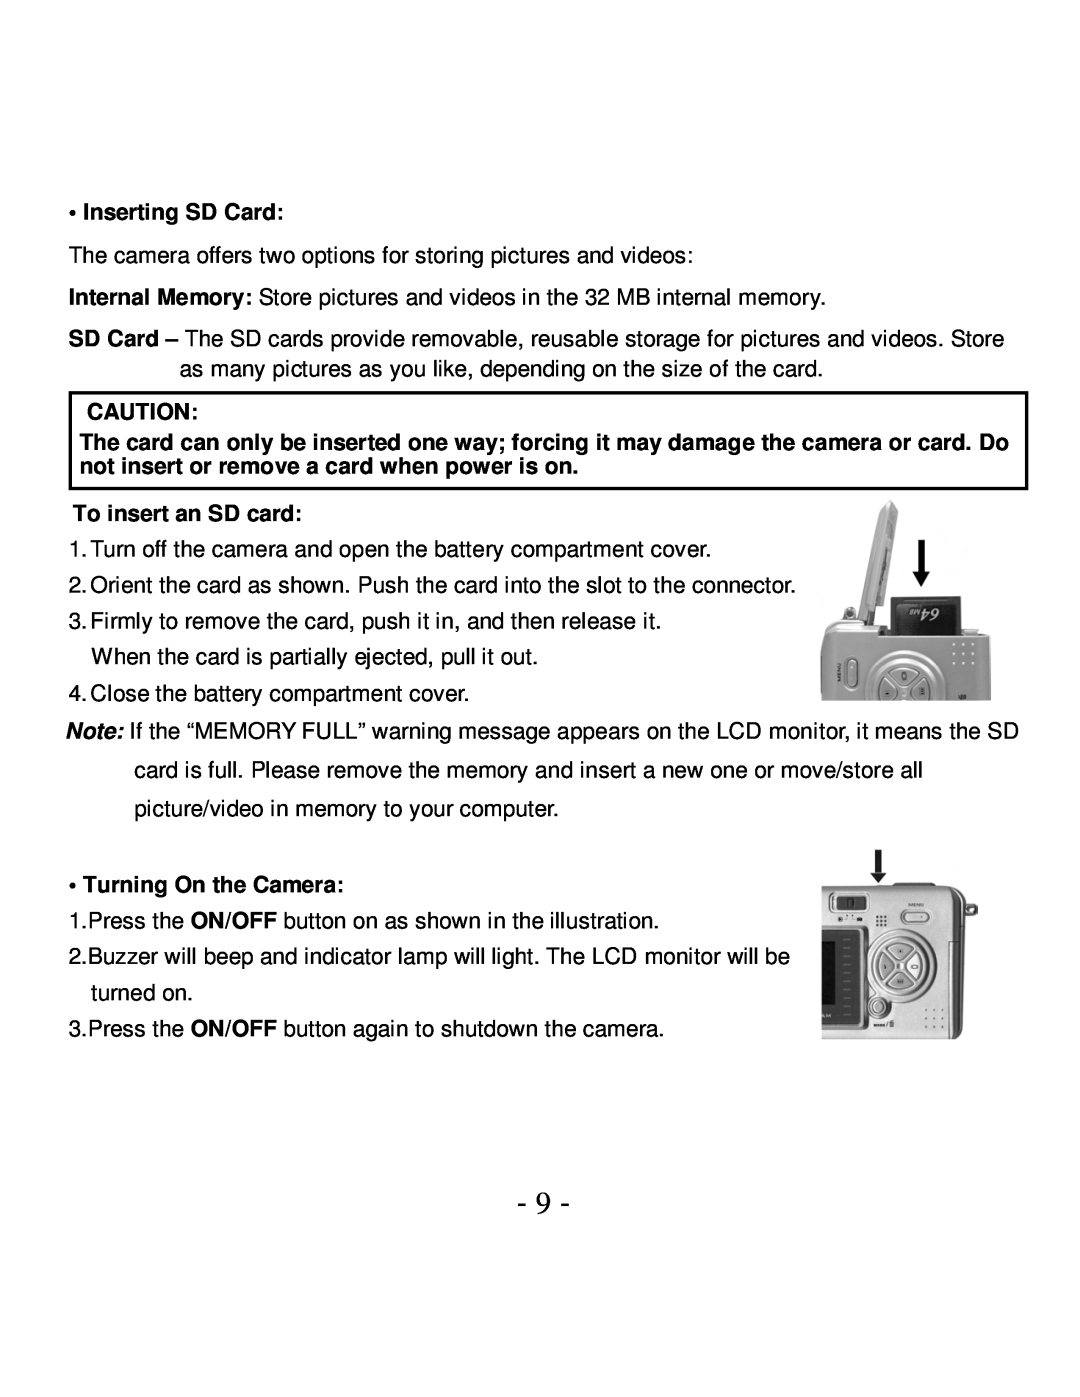 VistaQuest VQ5015 user manual Inserting SD Card, To insert an SD card, Turning On the Camera 